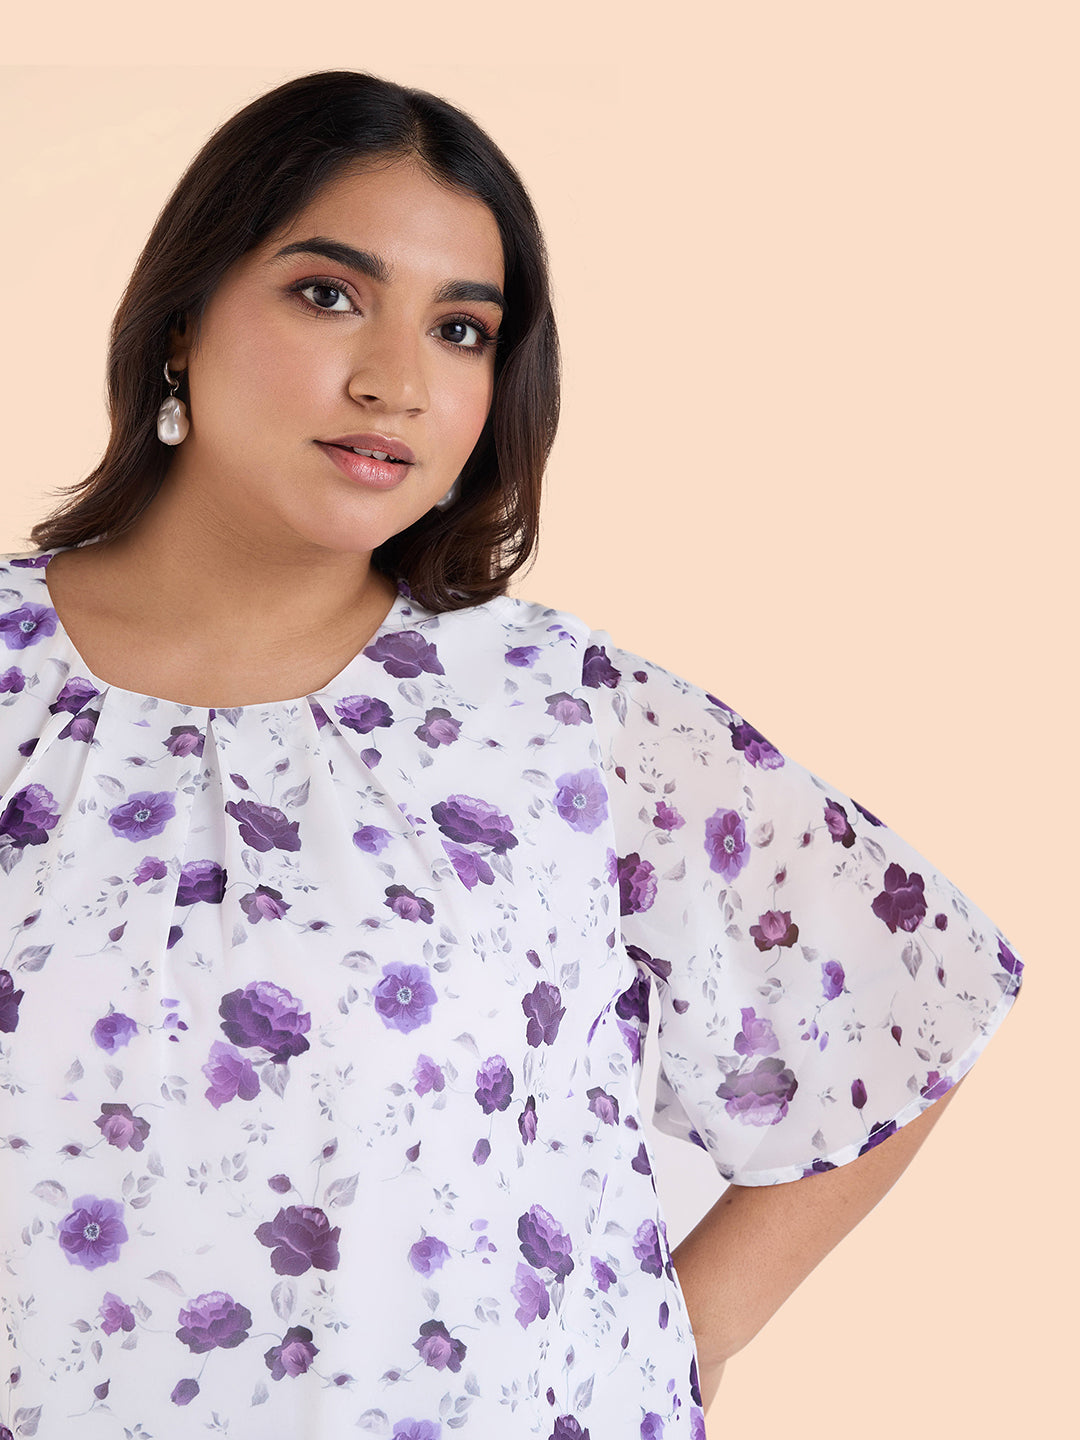 Scattered Floral Printed Top